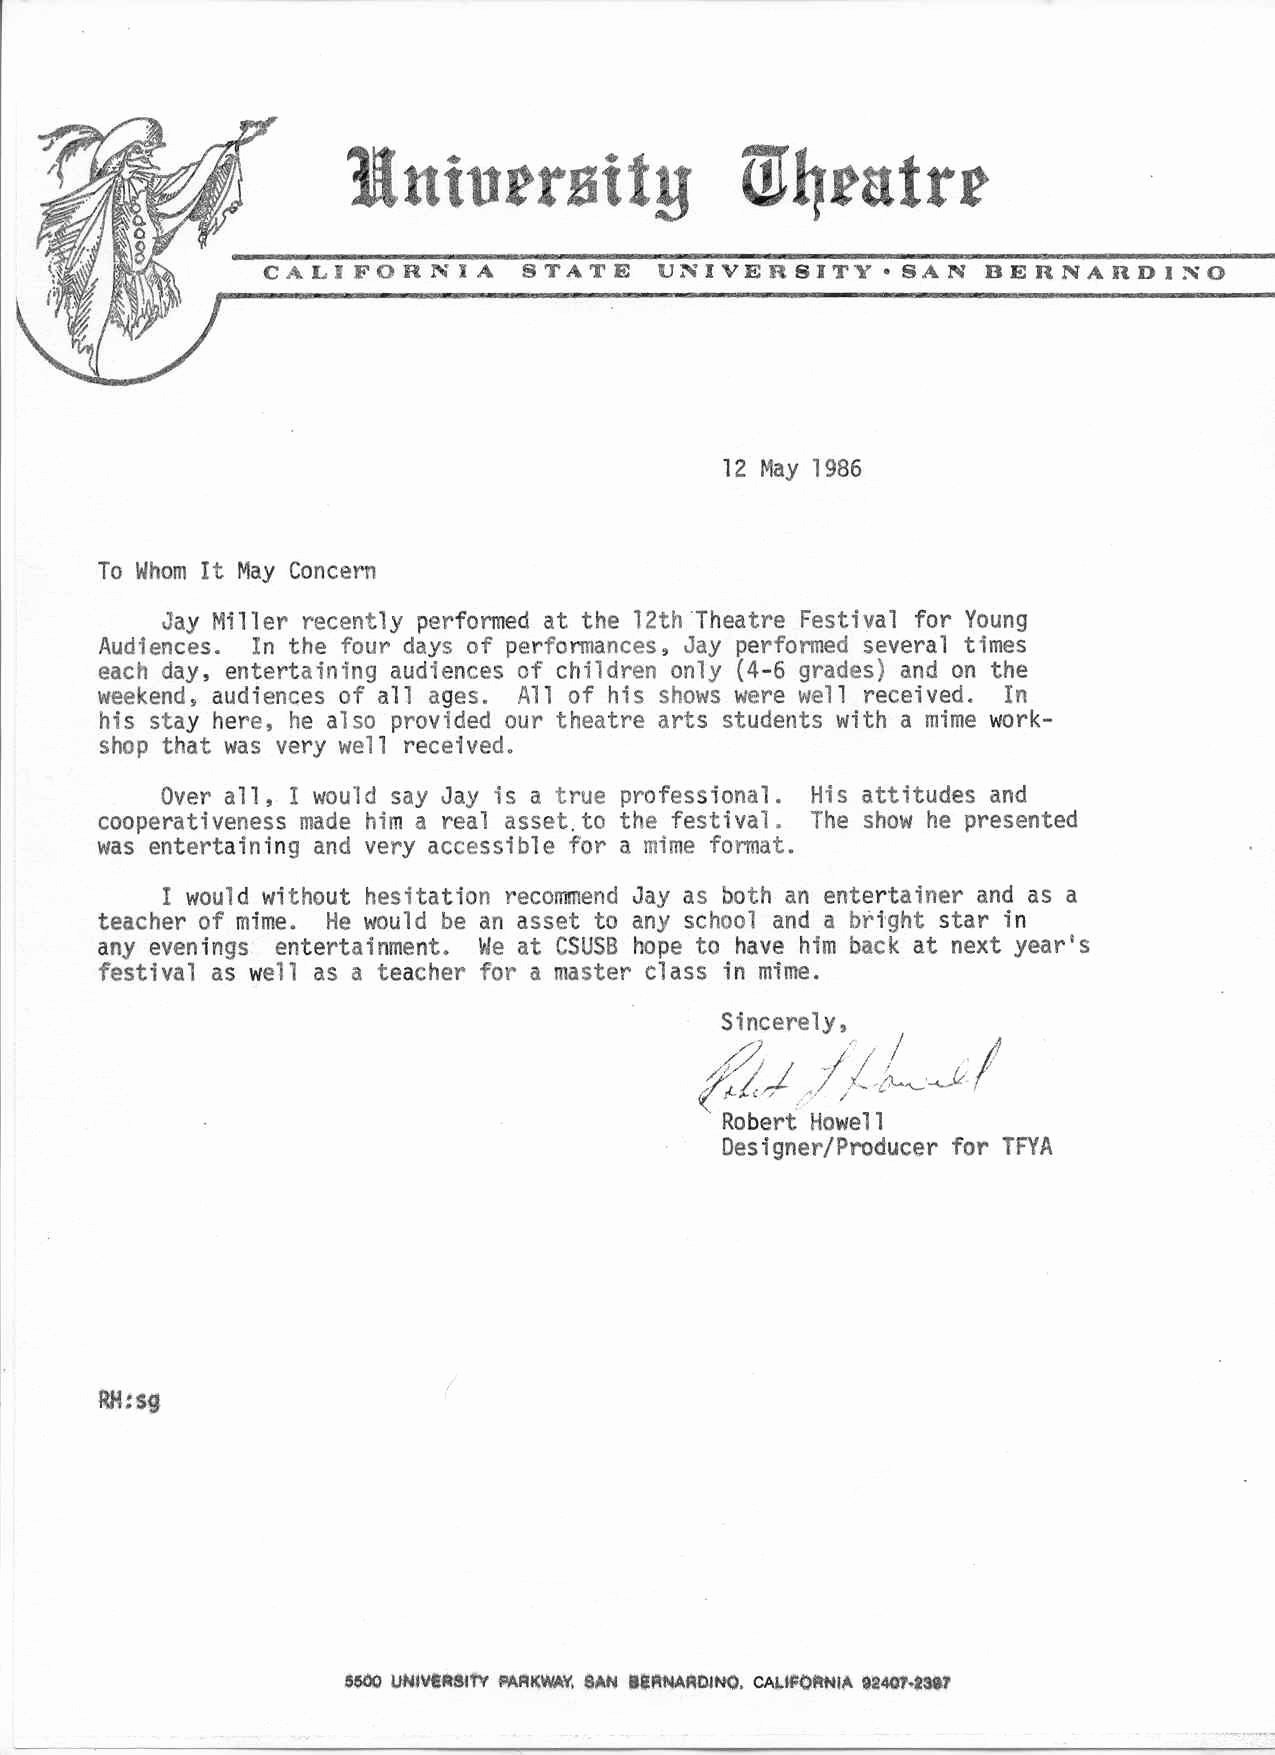 Berkeley Letter Of Recommendation New Writing A Letter Of Re Mendation Teachers Name